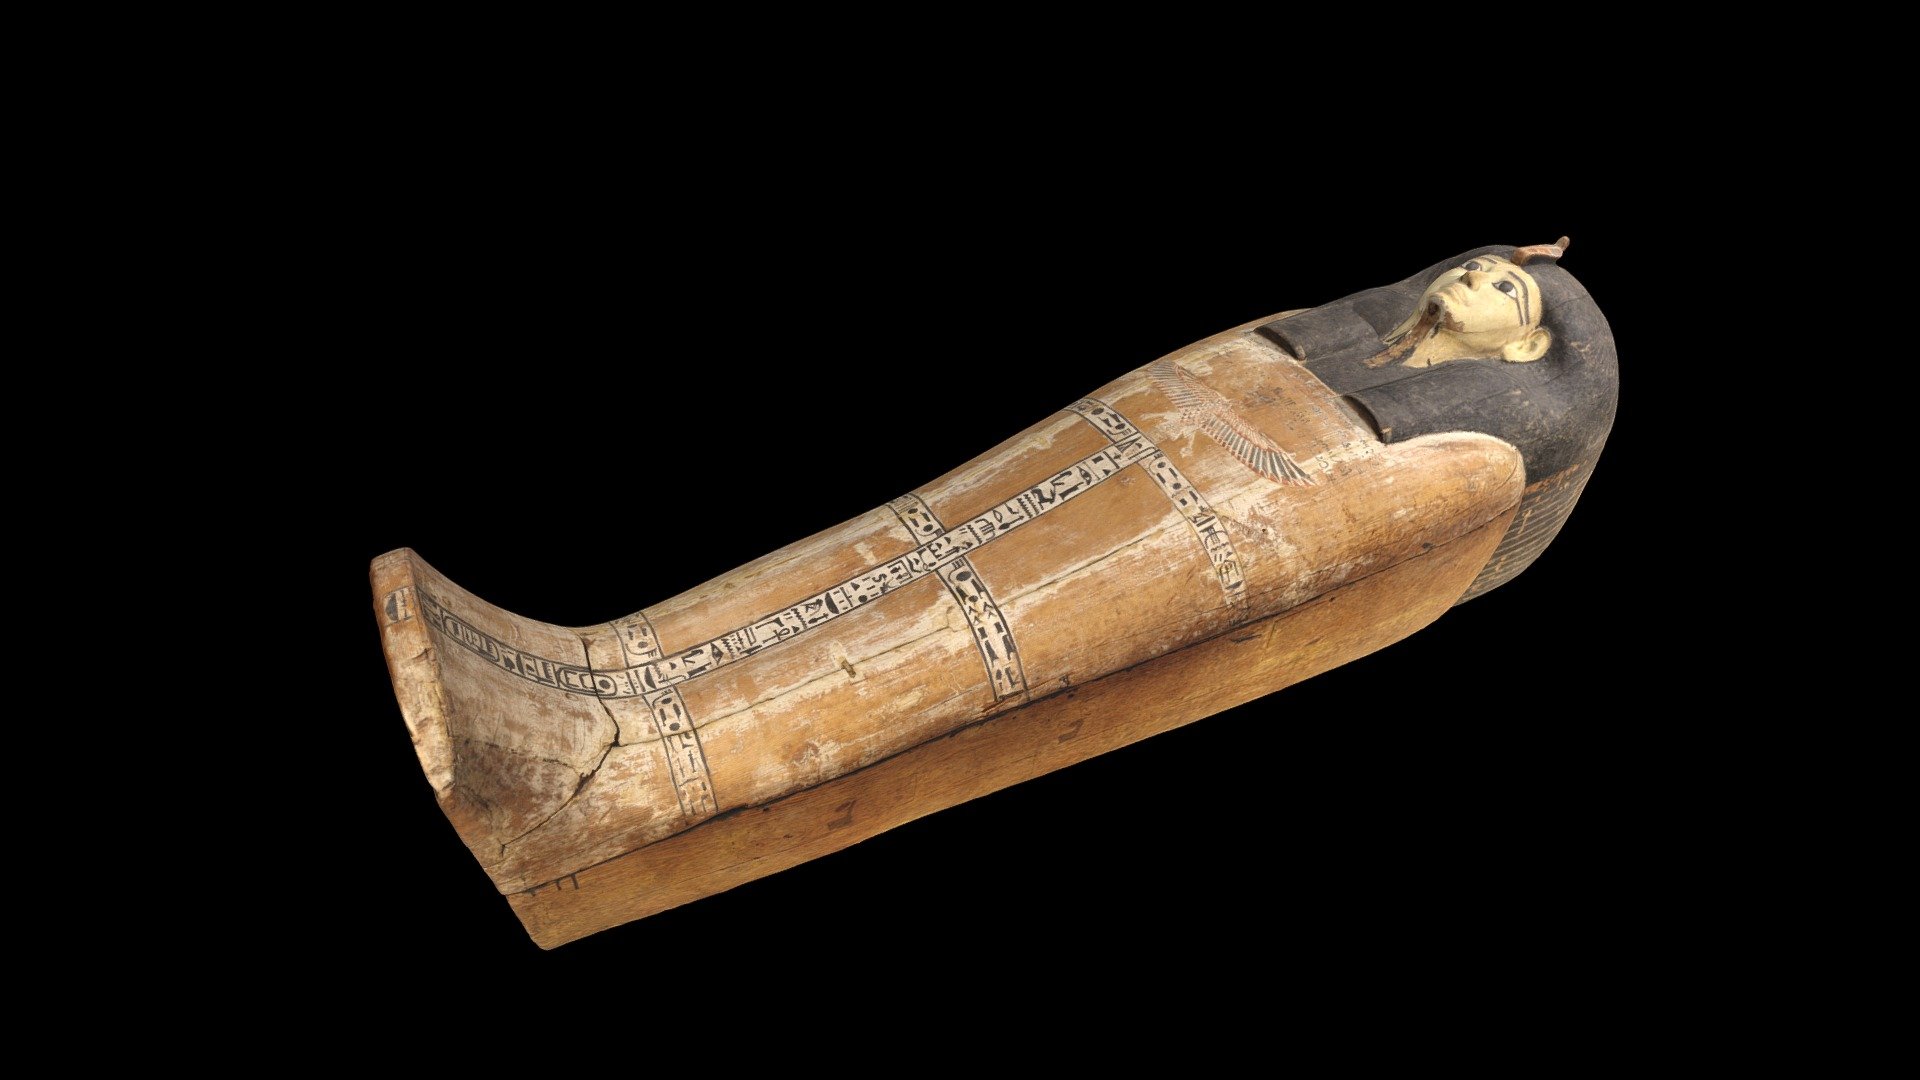 Wooden coffin of Pharaoh Amenhotep I of the 18th Dynasty in the Egyptian Museum, Cairo, Egypt.  This coffin is the one in which his body was recovered in the Royal Mummy Cache in tomb DB320 in 1881.  However, it is a replacement coffin, having been origianlly made for a priest by the name of Djehutymose.  The inscription down the front of the coffin calls upon the god Osiris-Wennefer to provide offerings of bread, beer, oxen, fowl, and all good and pure things to Amenhotep I.

Created from 284 photographs (Canon EOS Rebel T5i) using Metashape 1.5.4.  The base of the coffin was not available for scanning and has been recreated using Meshmixer 3.5 - Coffin of Pharaoh Amenhotep I - 3D model by danderson4 3d model